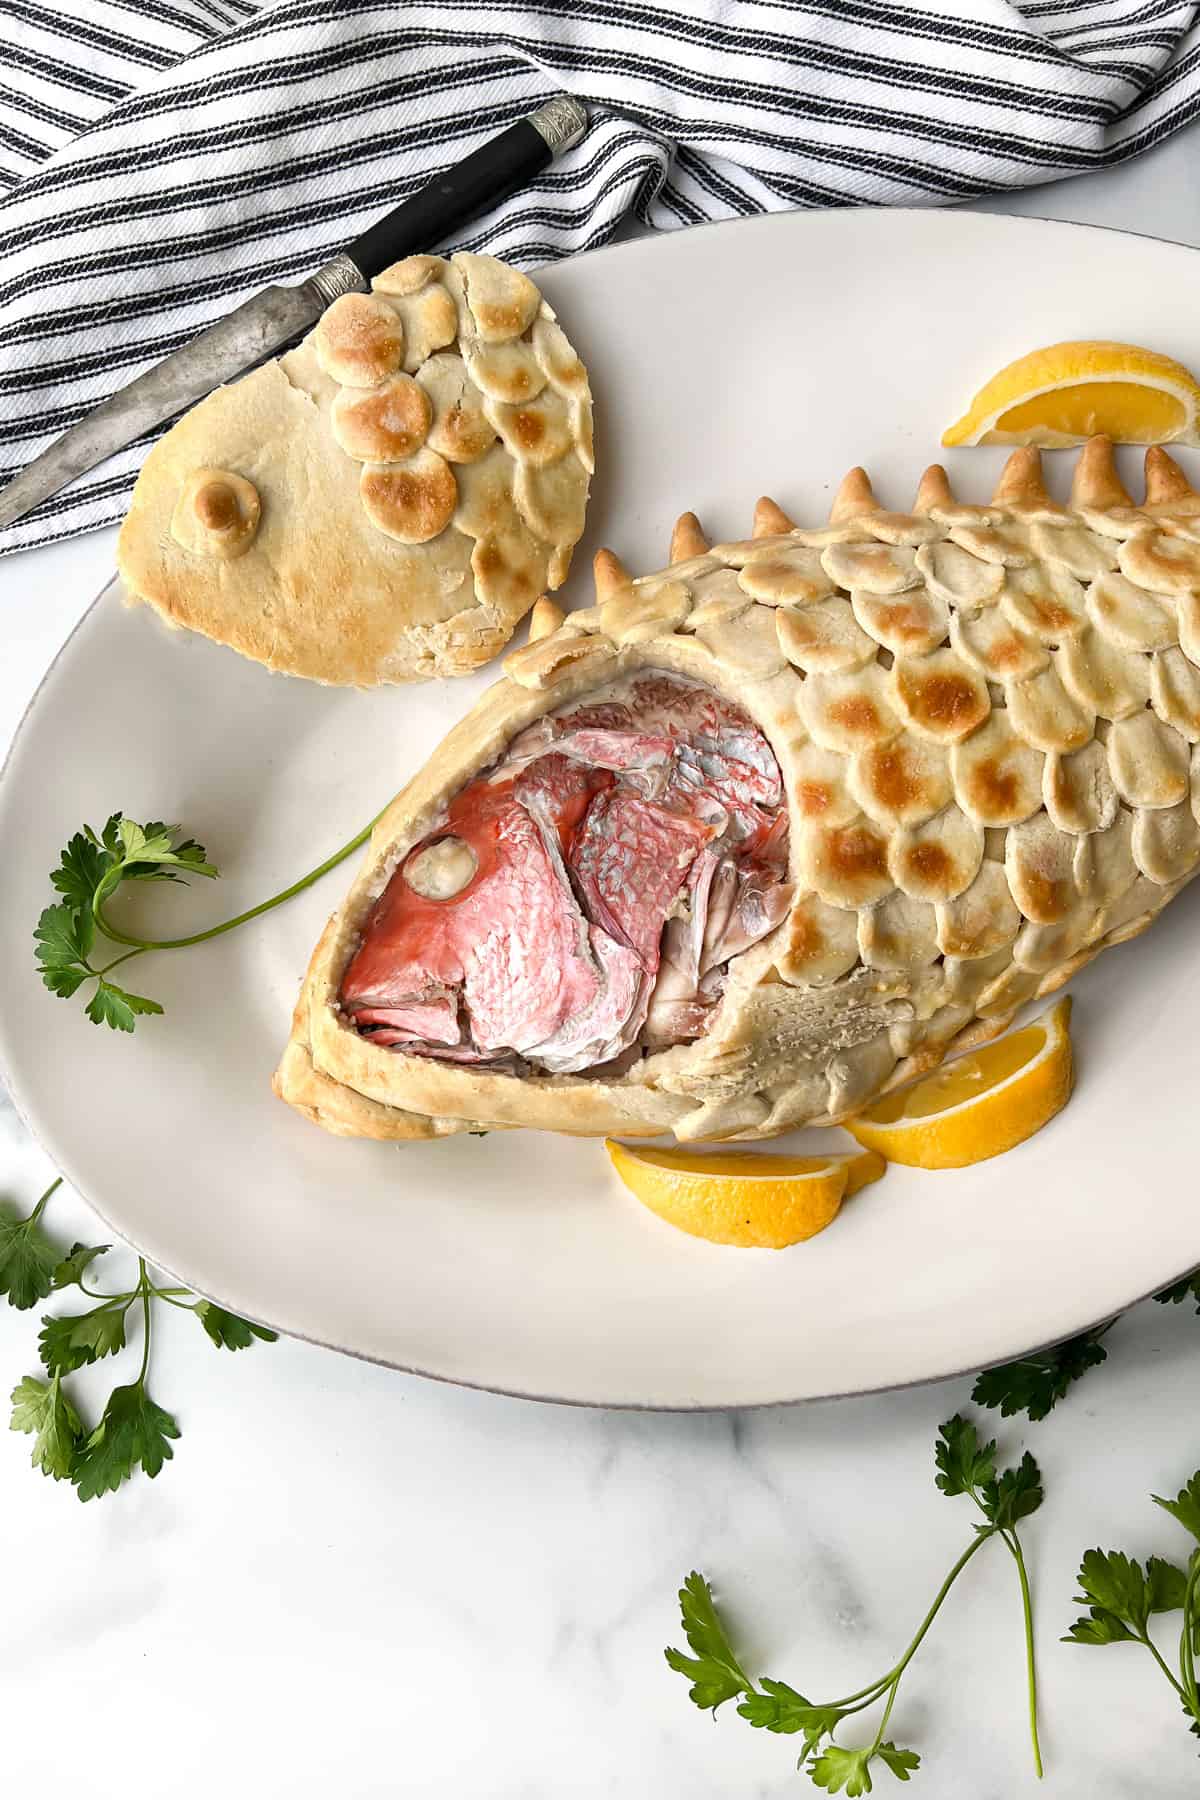 A baked fish in salt pastry with the pastry cut so the fish head is exposed   lying on a plate garnished with parsley and lemon with a plate of lemon wedges in the background